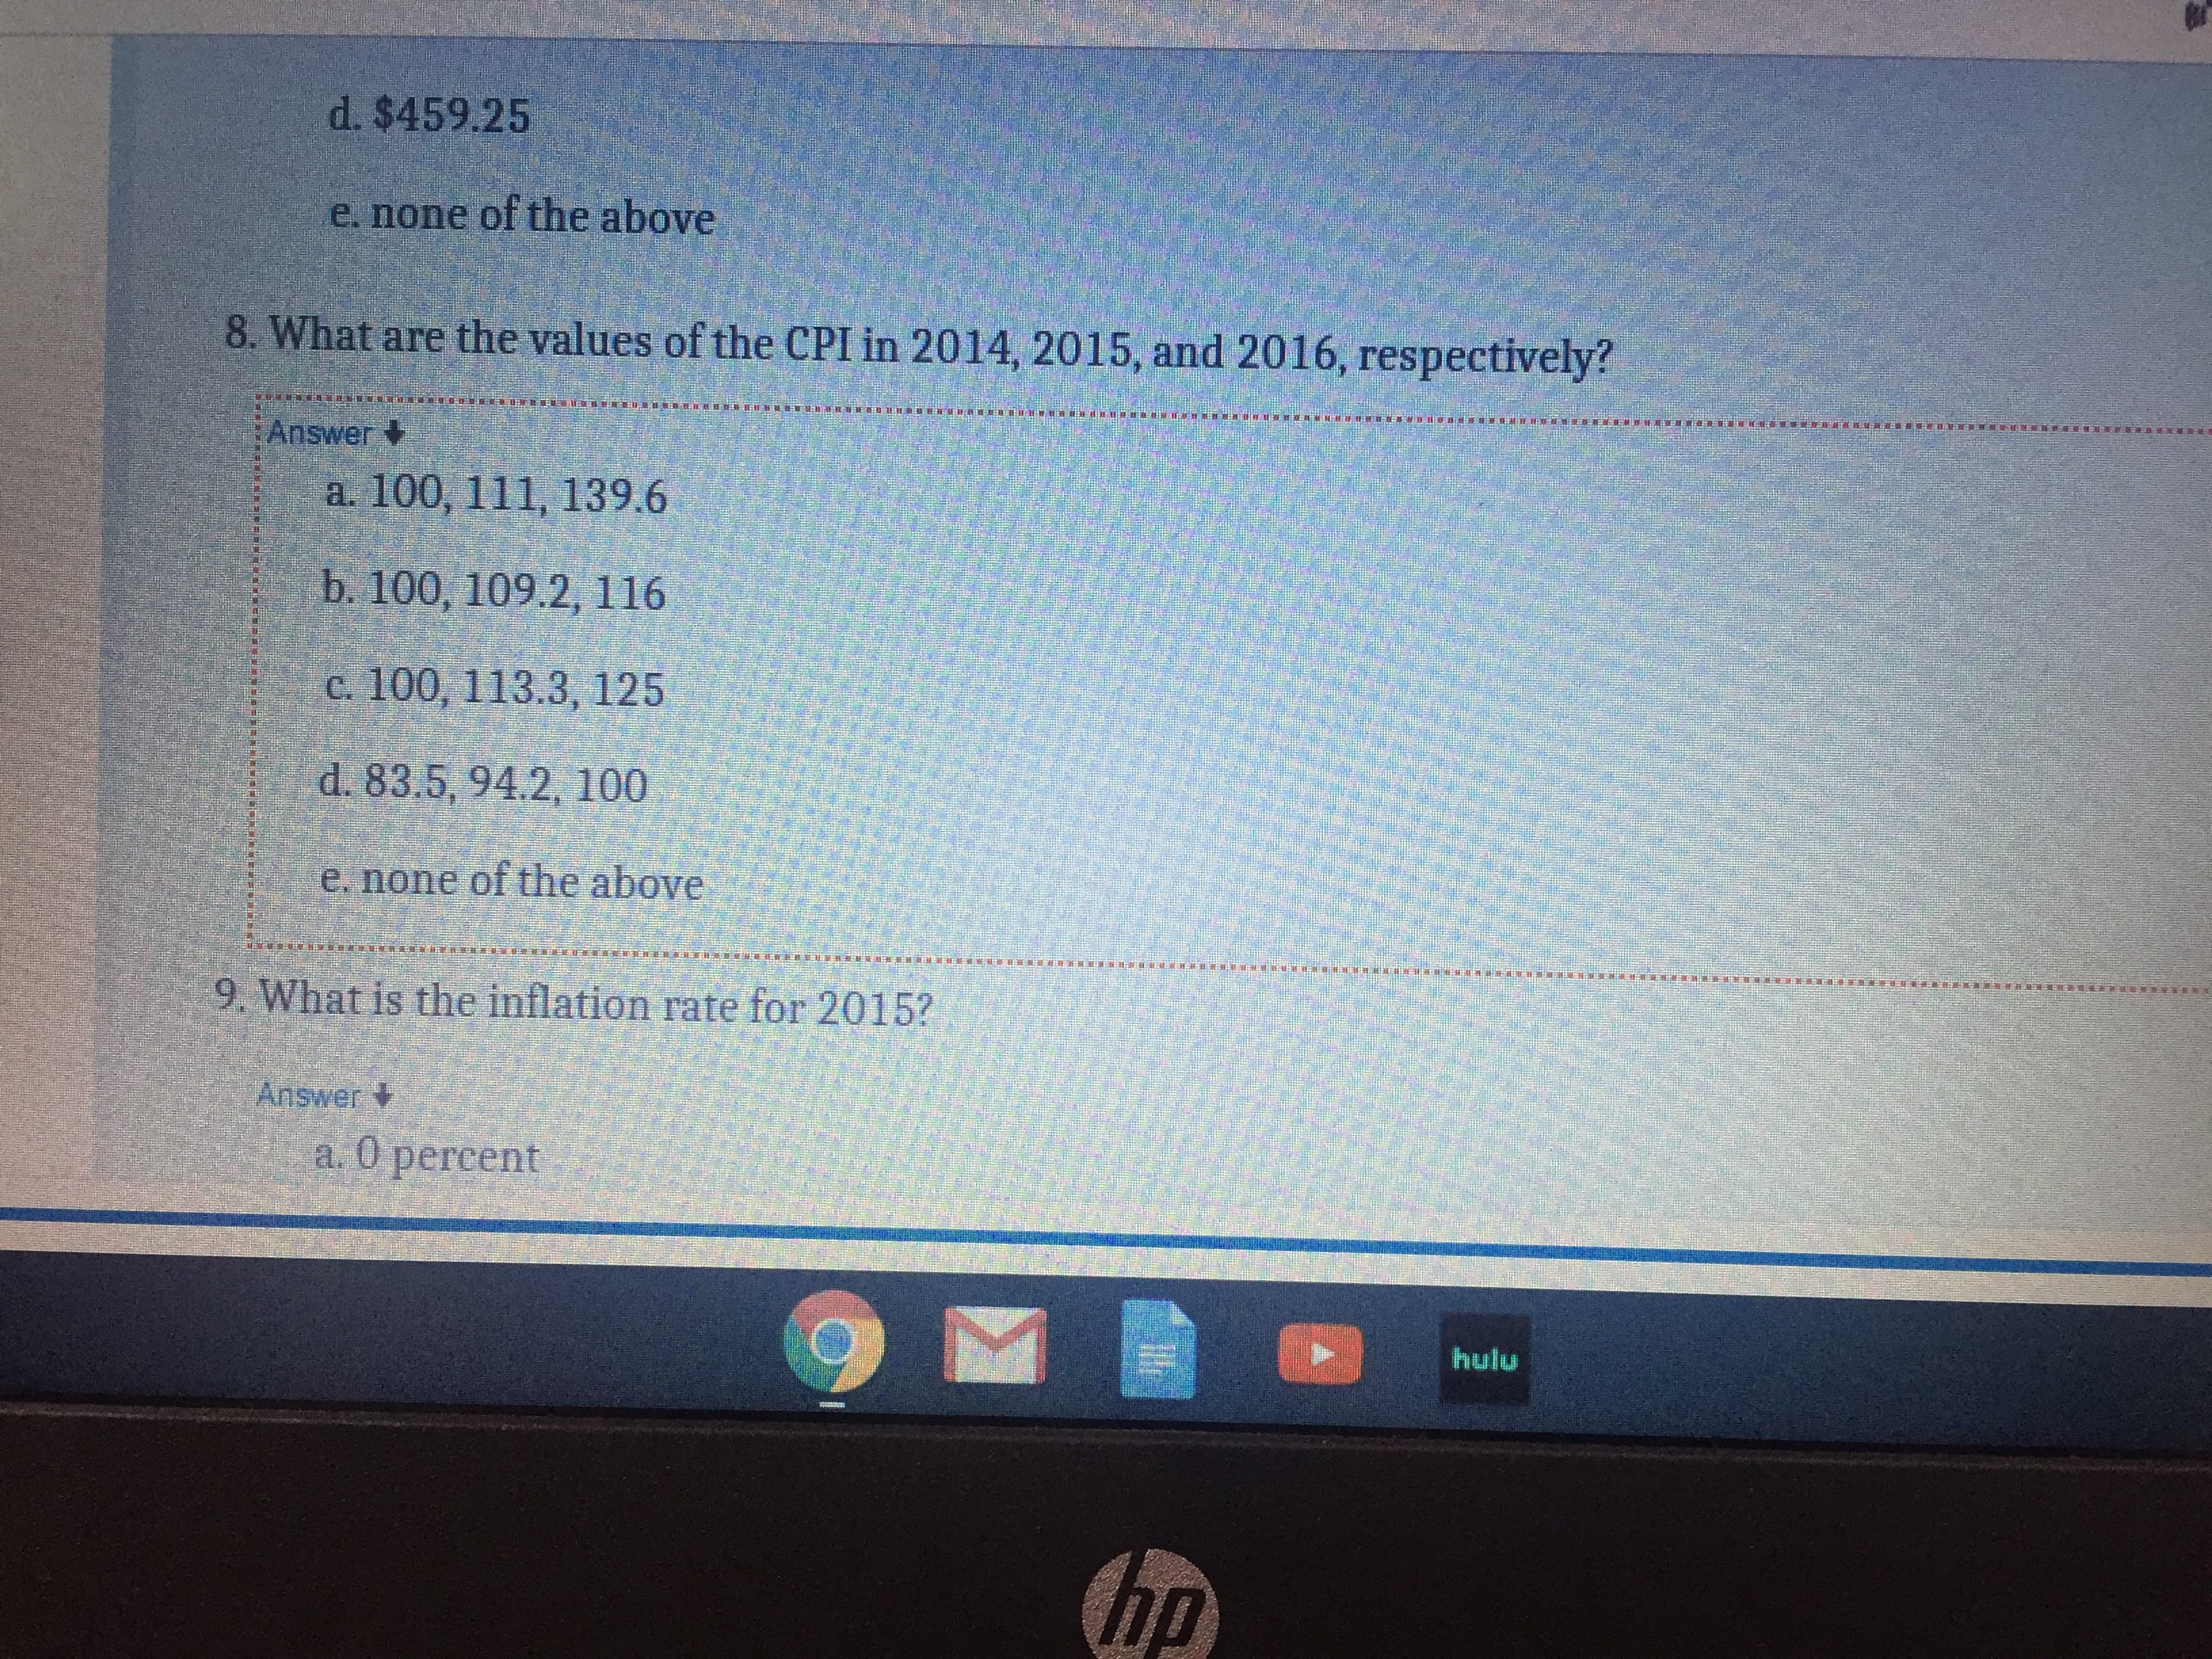 d. $459.25
e. none of the above
8. What are the values of the CPI in 2014, 2015, and 2016, respectively?
Answer
a. 100, 111, 139.6
b. 100, 109.2, 116
c. 100, 113.3, 125
d. 83.5, 94.2, 100
e. none of the above
9. What is the inflation rate for 2015?
Answer
а. О регсent
hulu
hp
